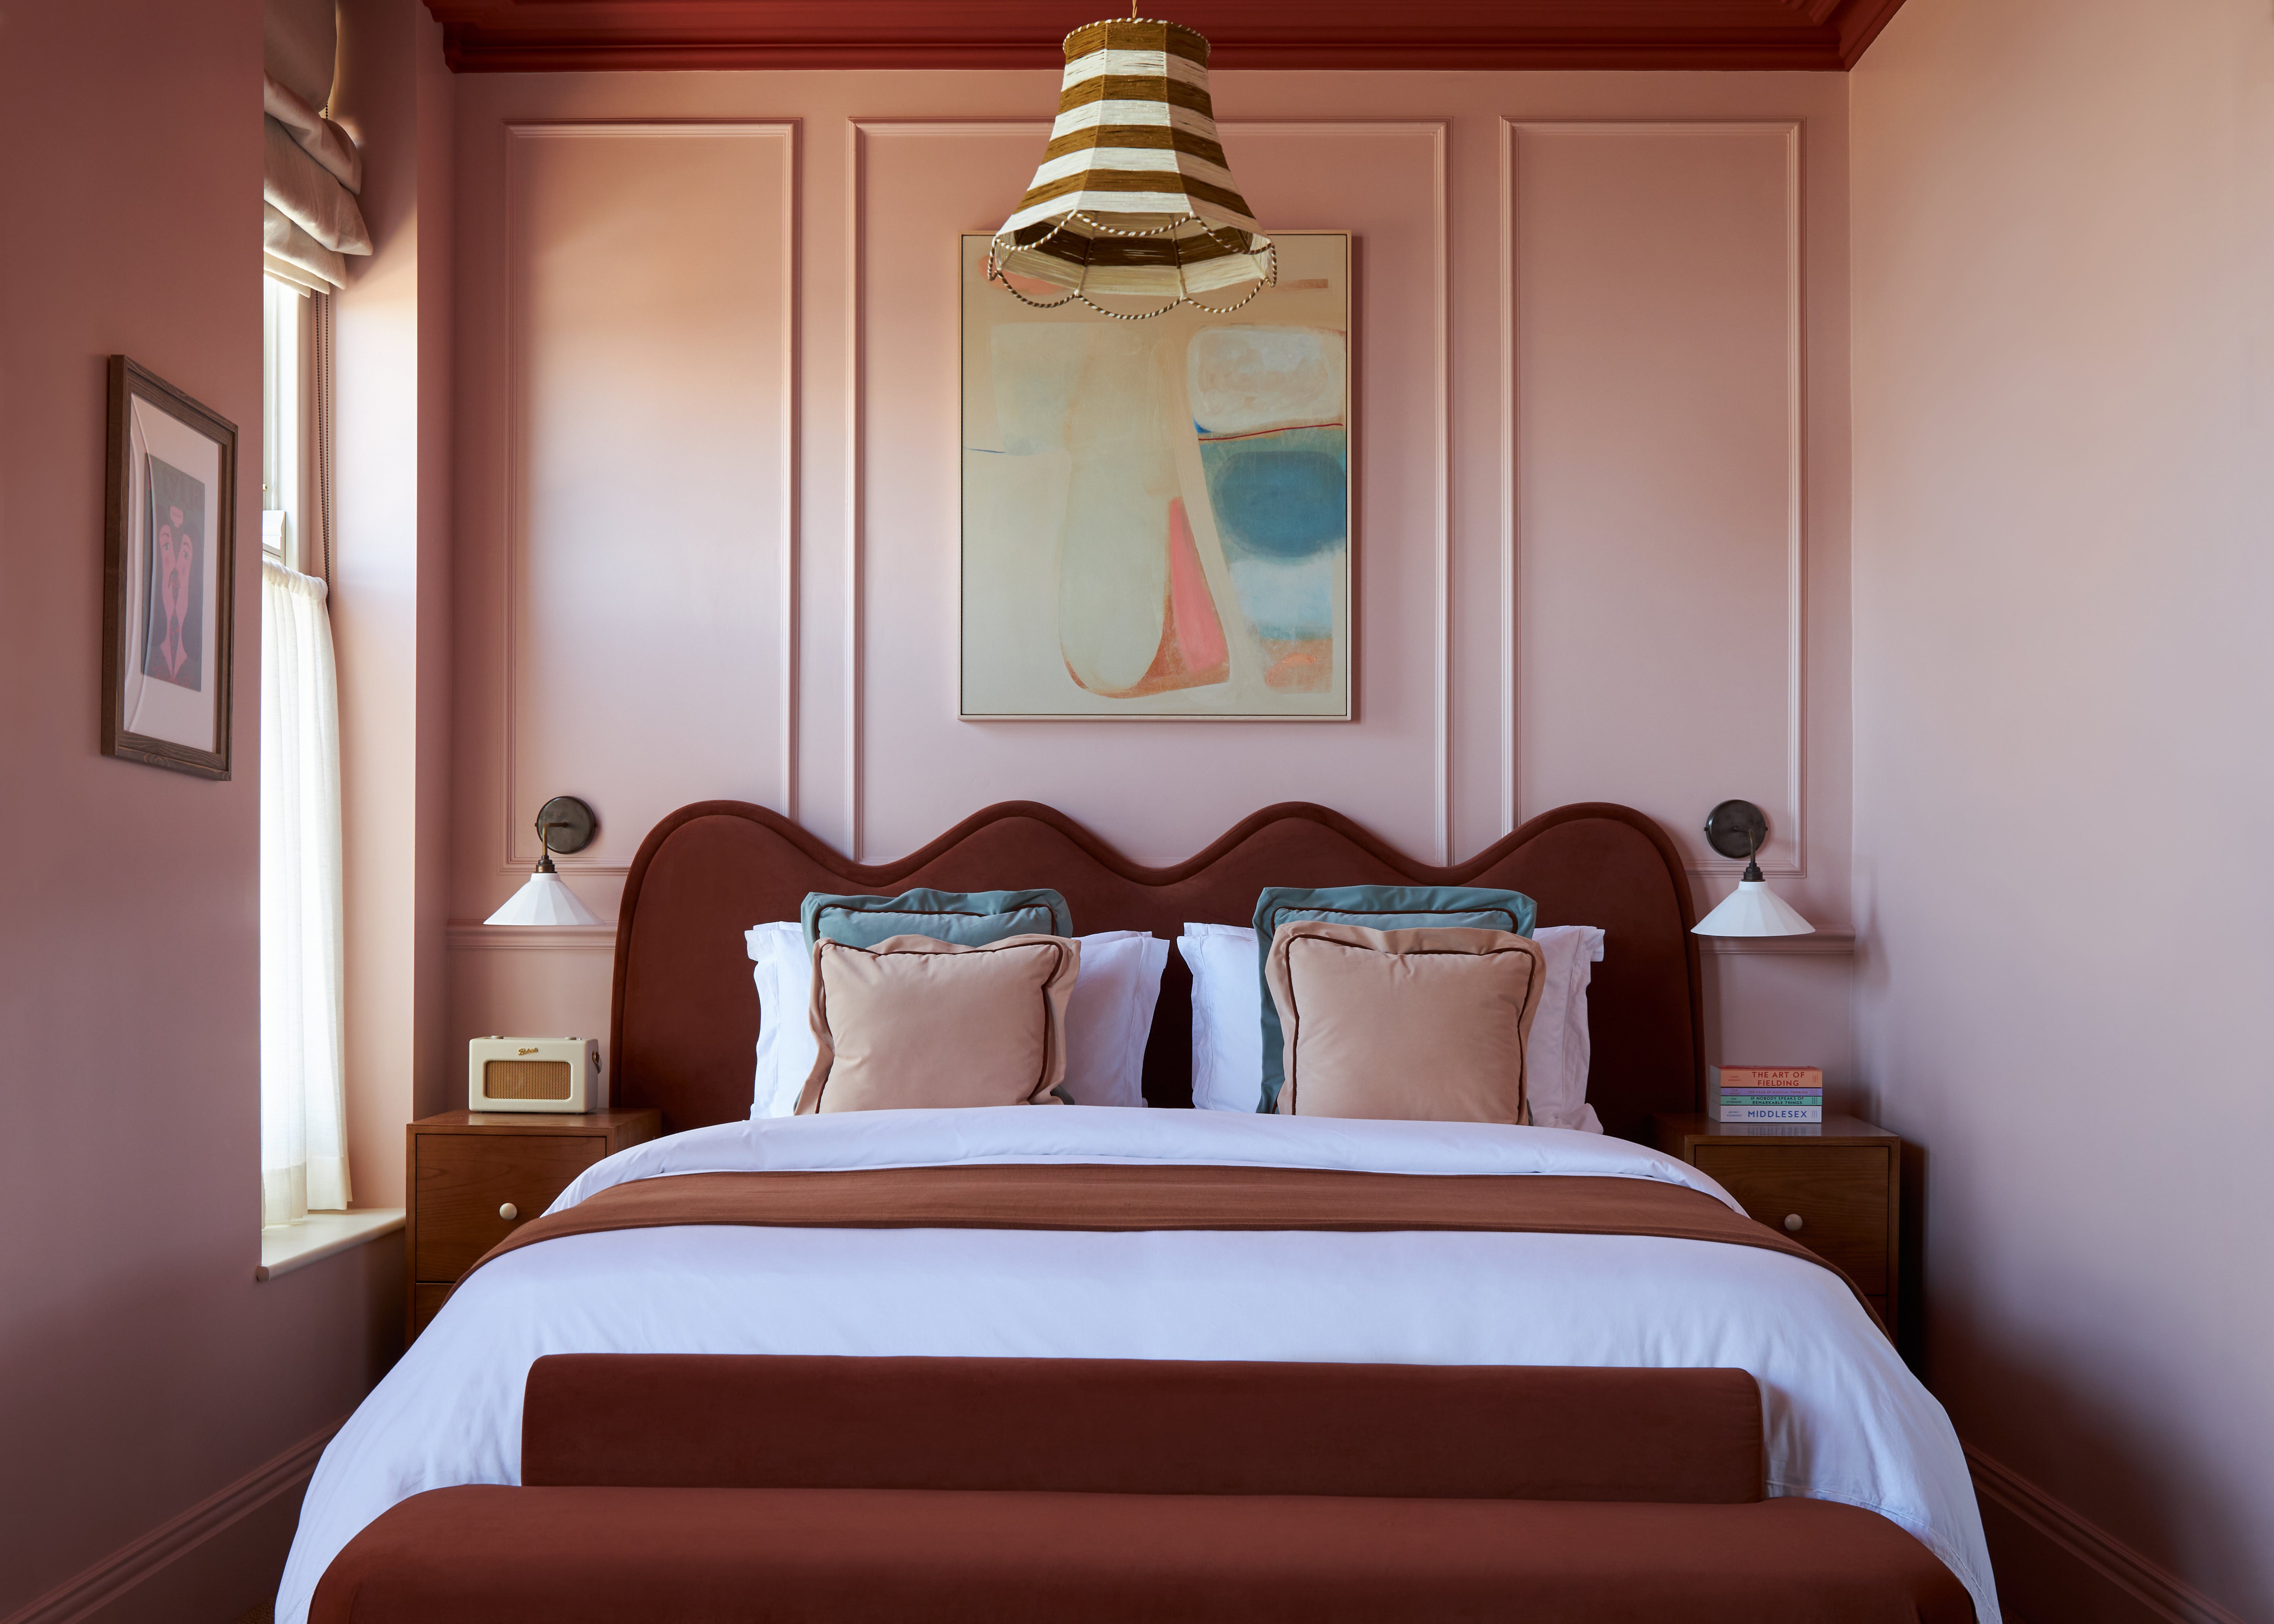 Everything from skirting boards to ceilings is drenched in warm pink, terracotta and burgundy in the boutique hotel